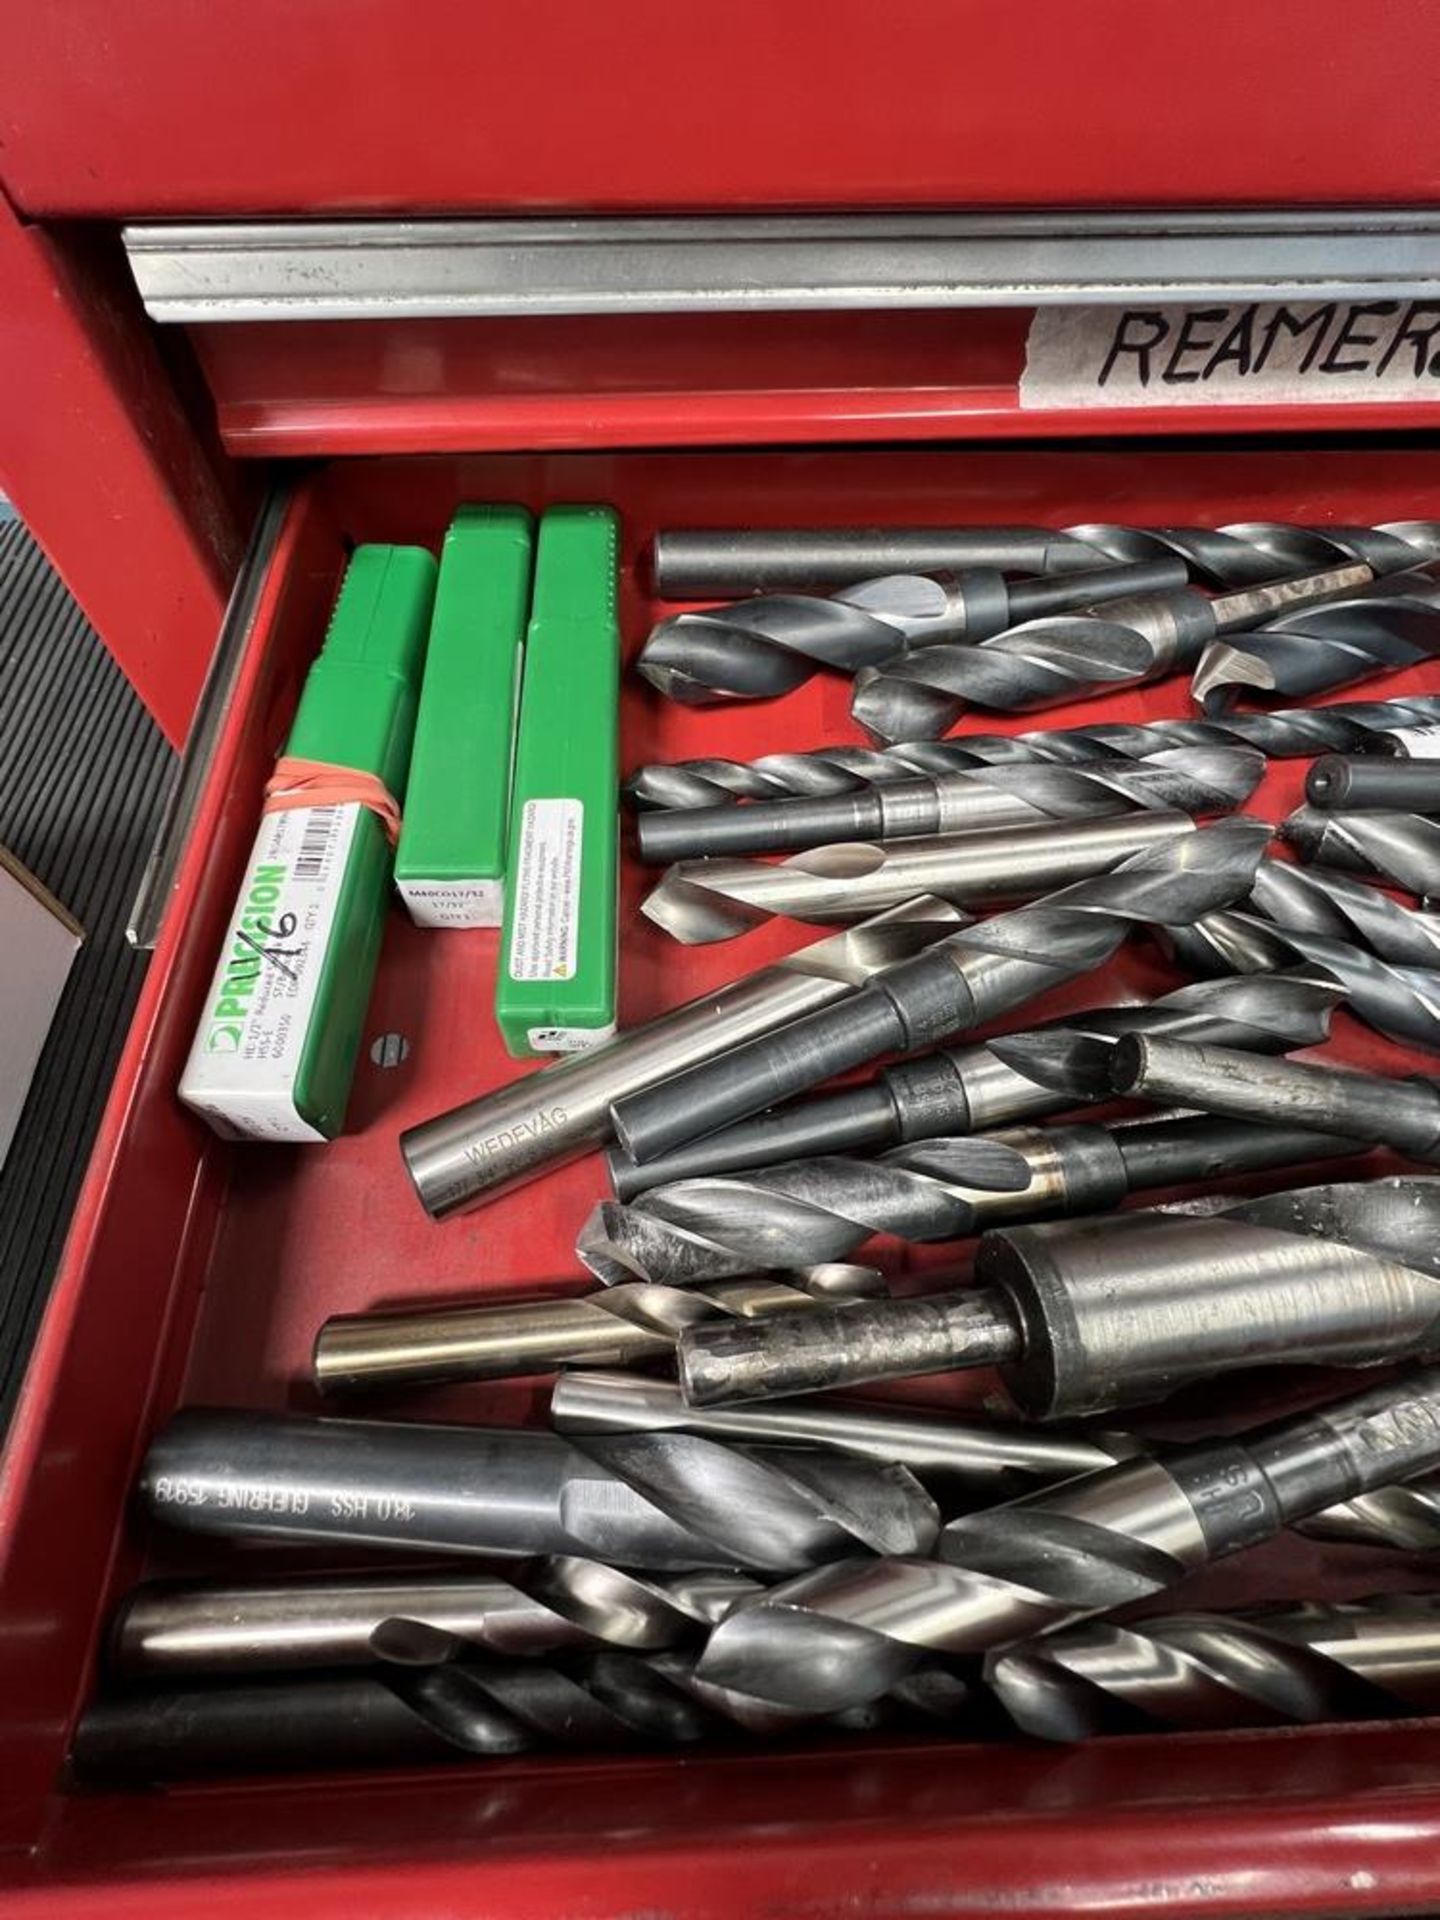 Water 100 Shop Series Tool Box Full of Reamers Big Drills & Key Cutters & Others - Image 7 of 9